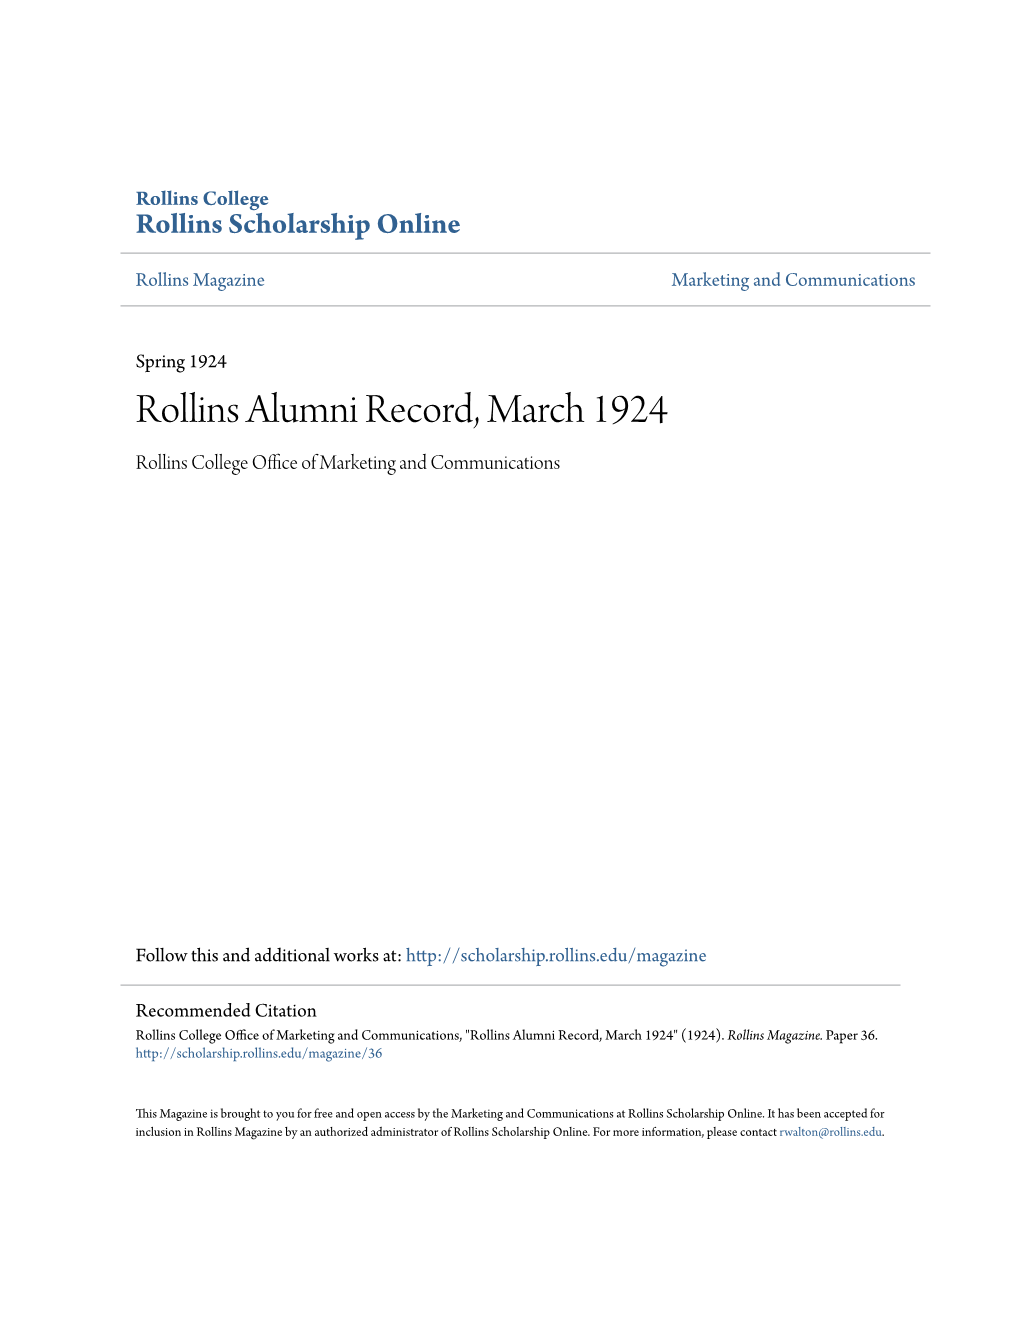 Rollins Alumni Record, March 1924 Rollins College Office Ofa M Rketing and Communications